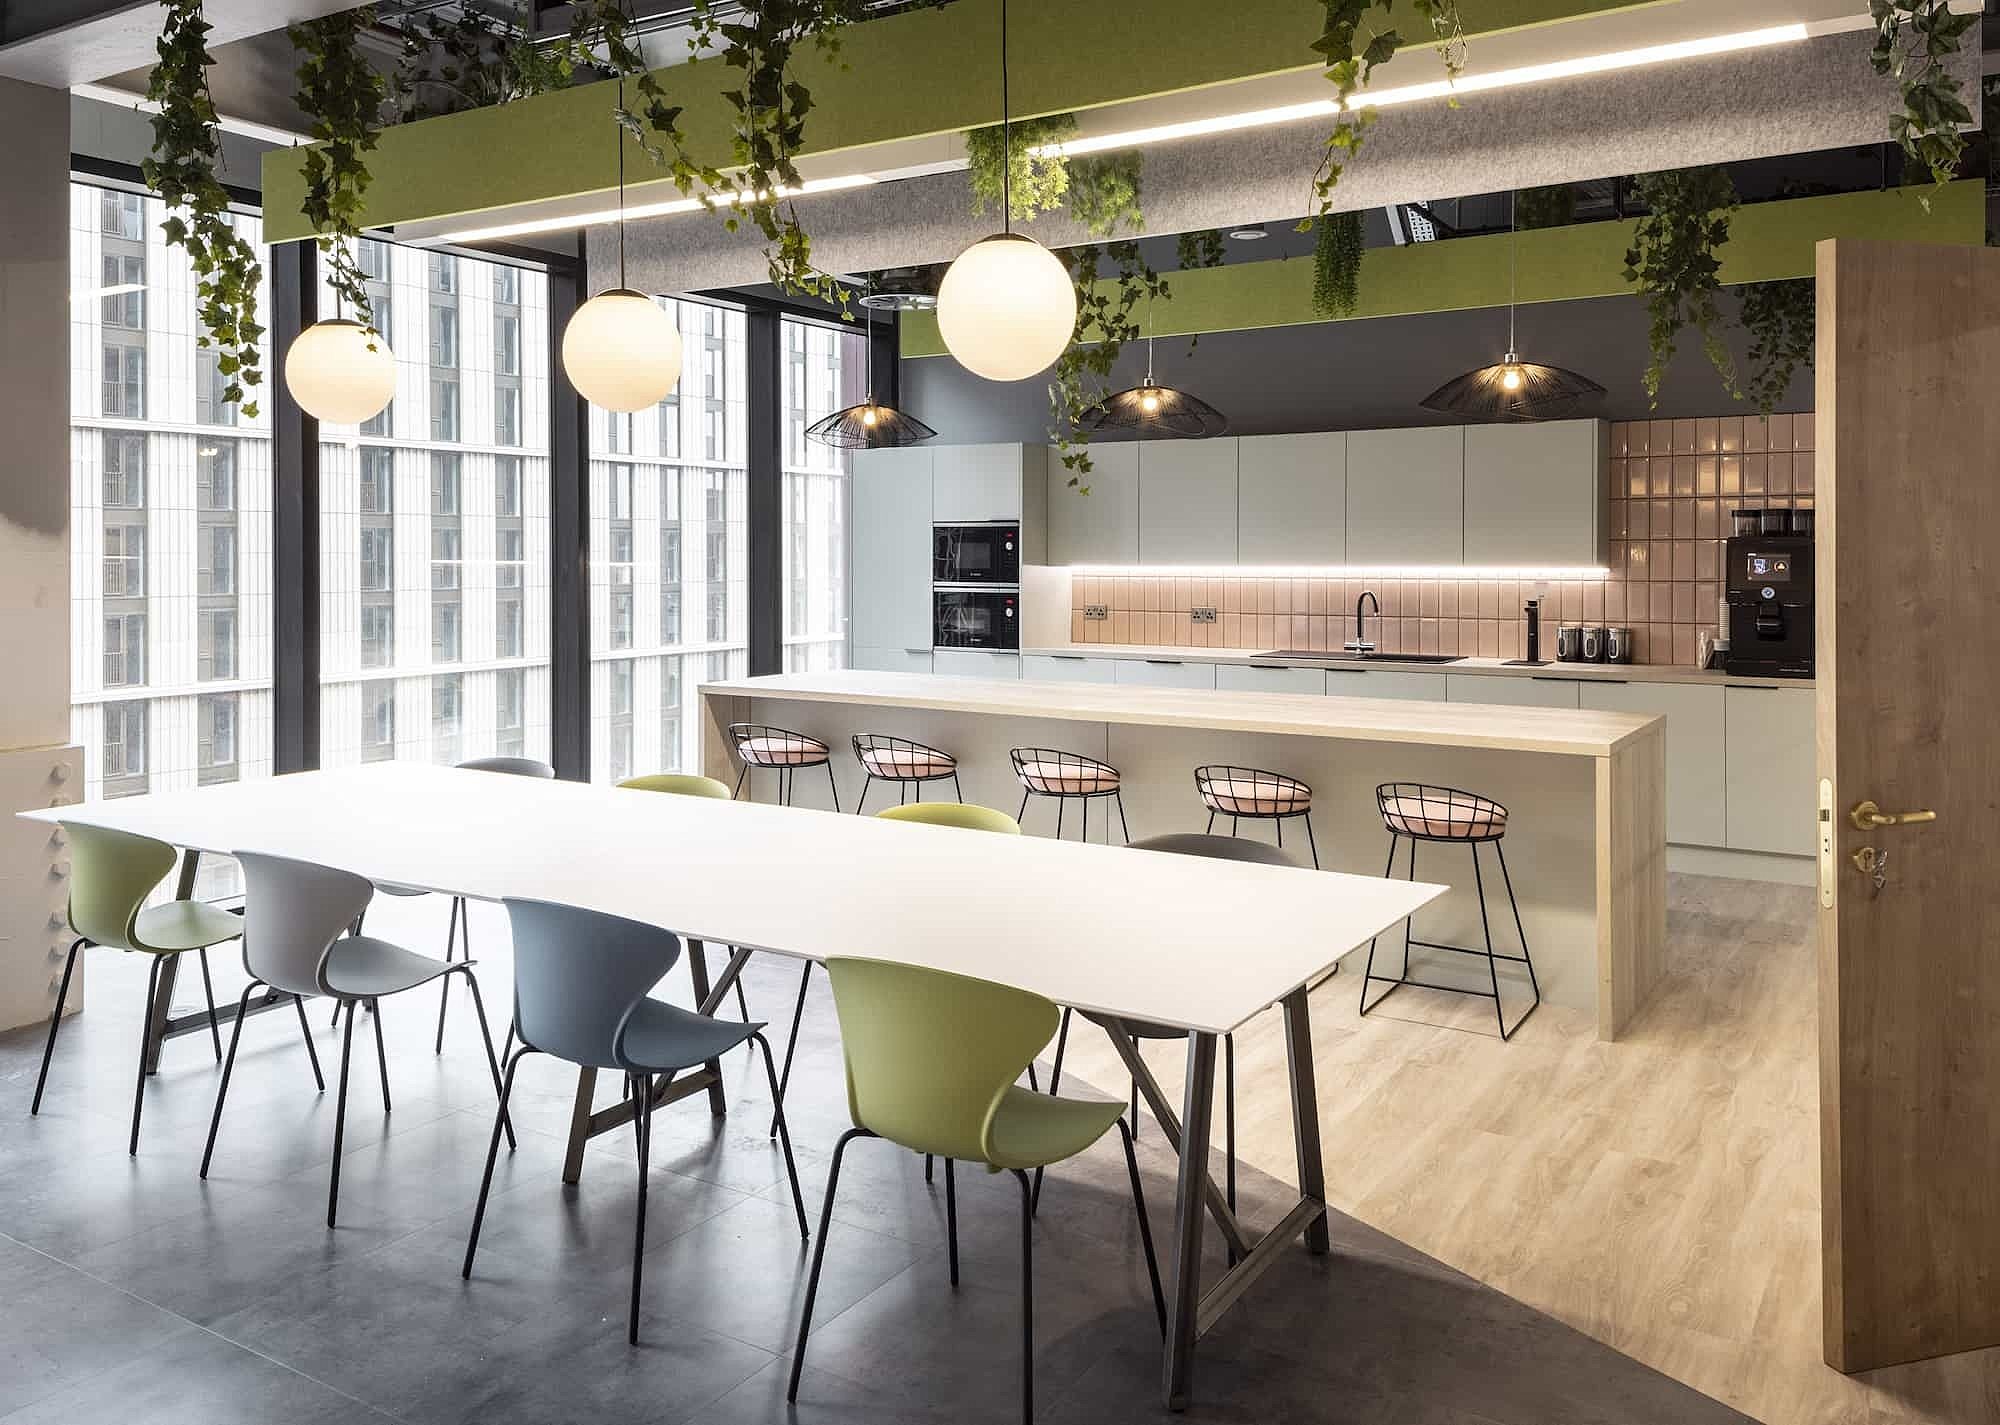 Mills Reeve office kitchen design and fit out